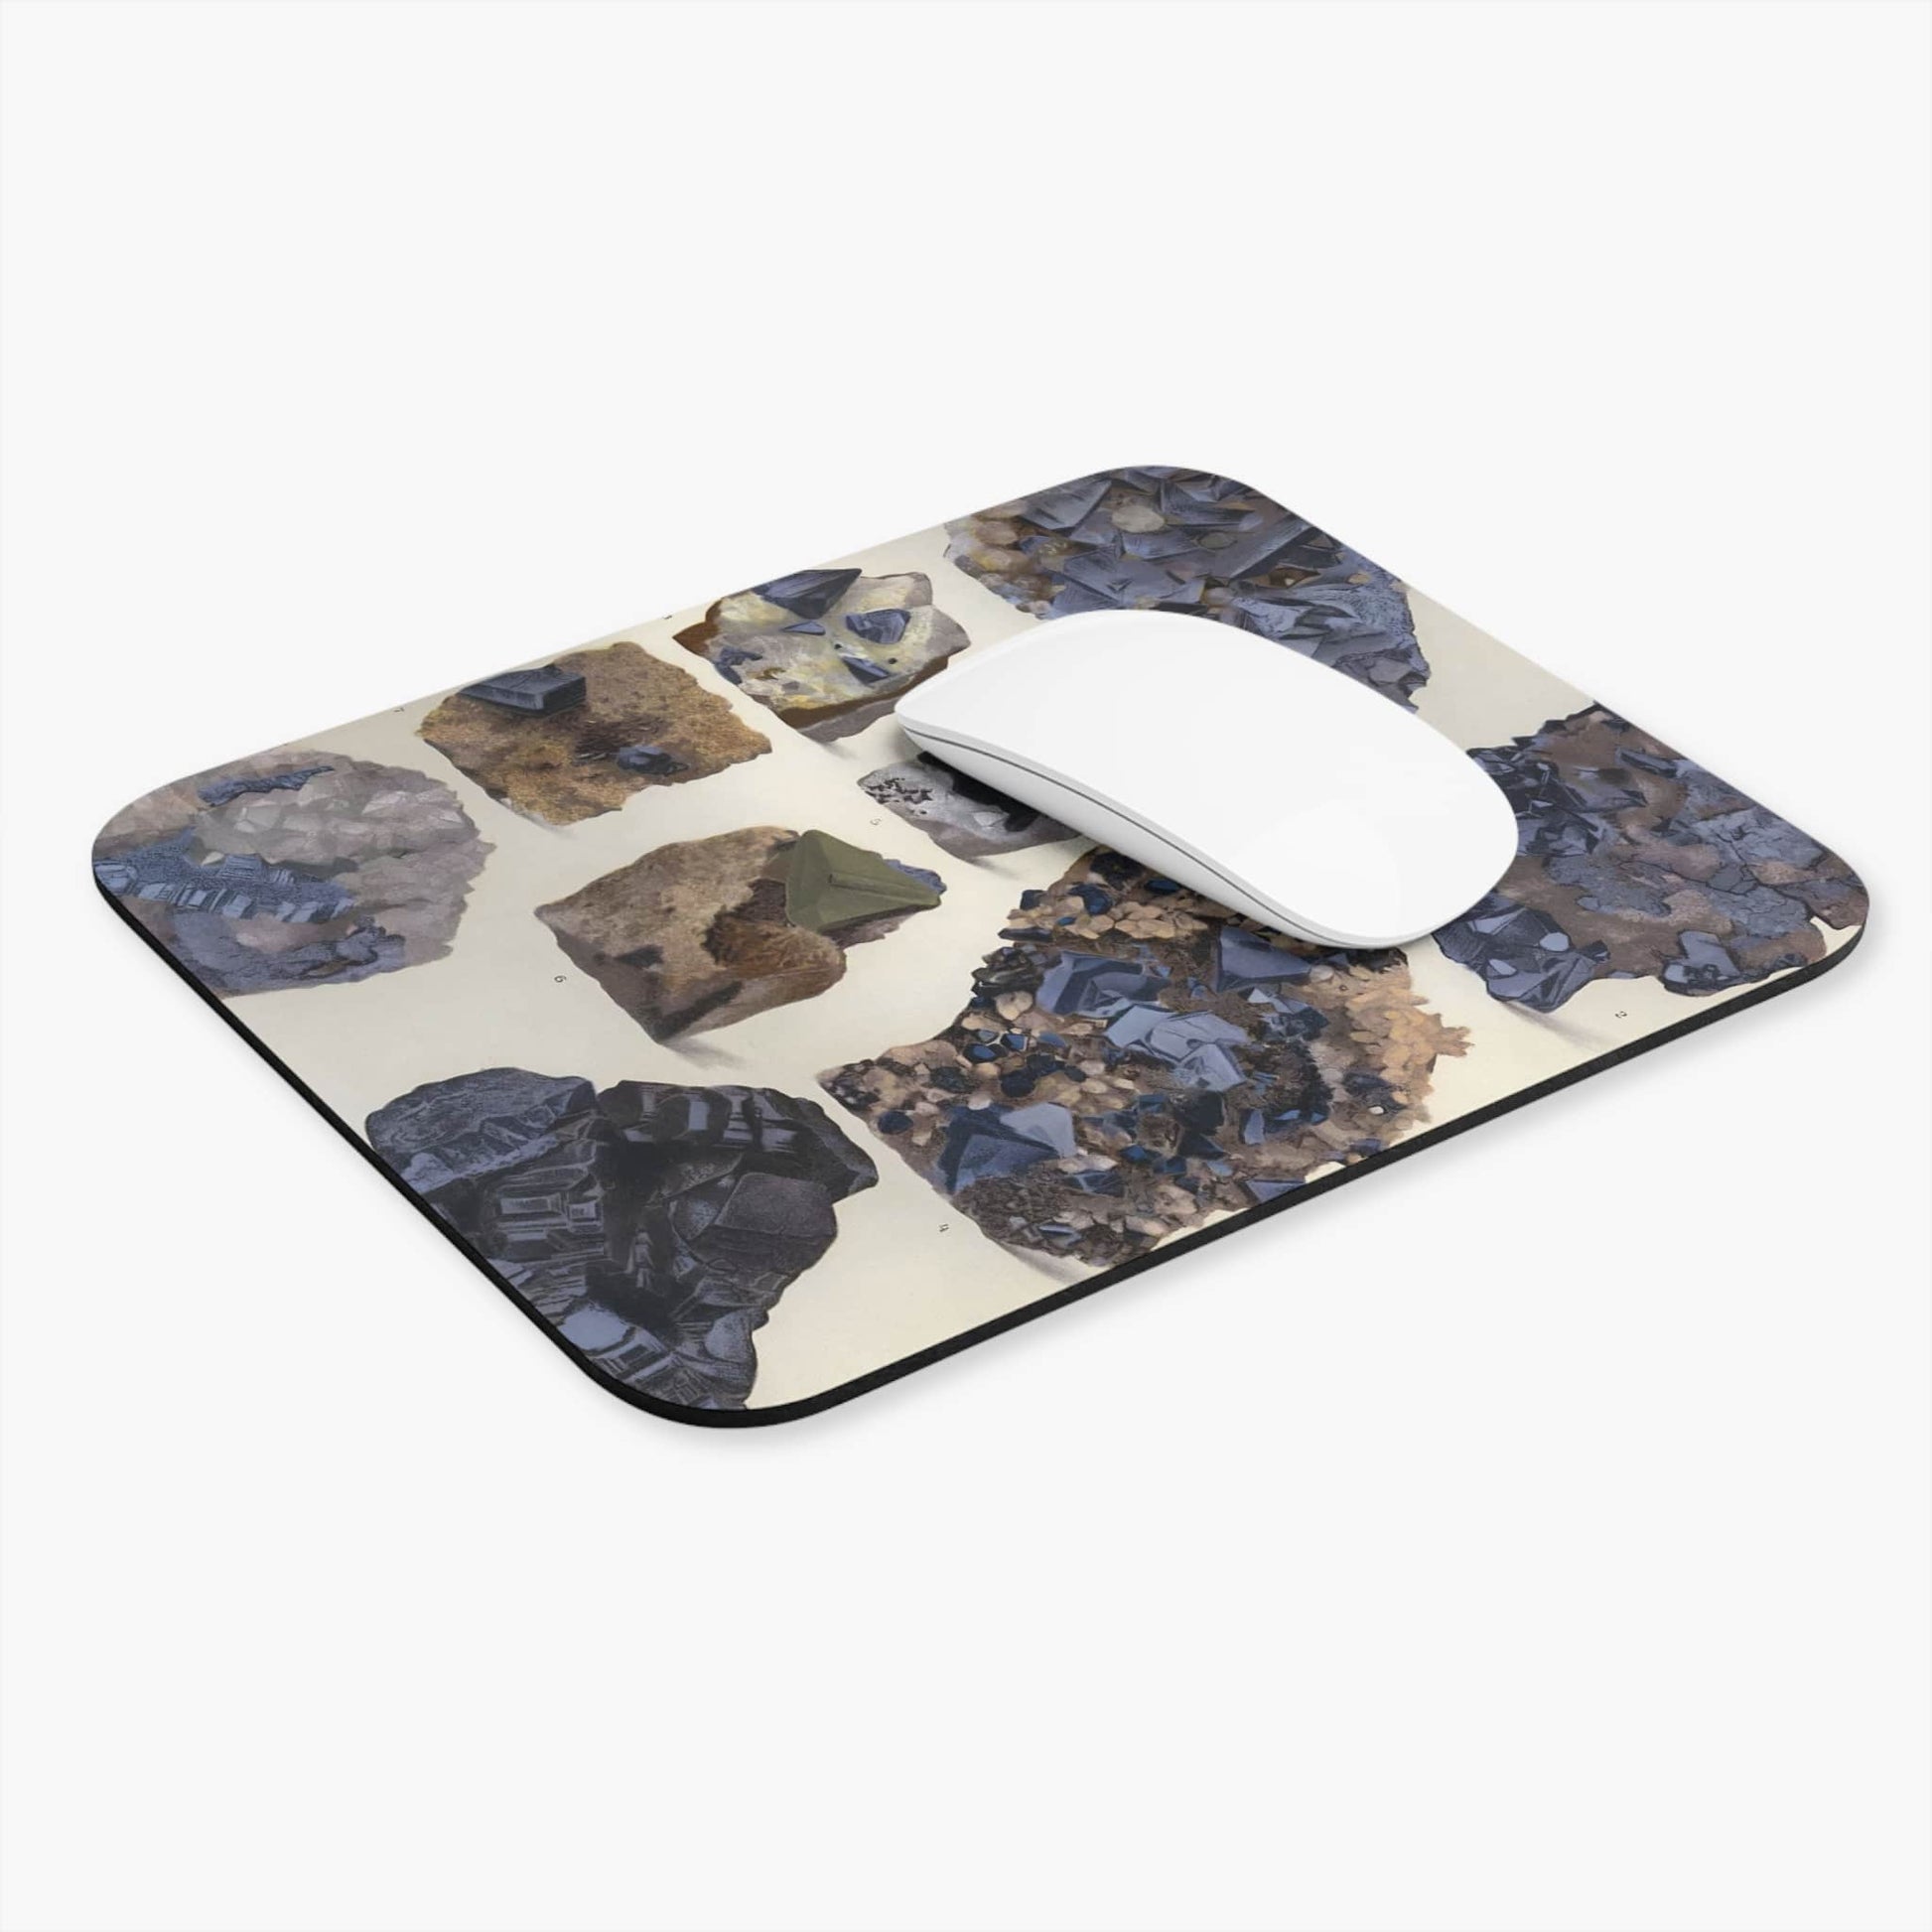 Vintage Rocks and Crystals Computer Desk Mouse Pad With White Mouse